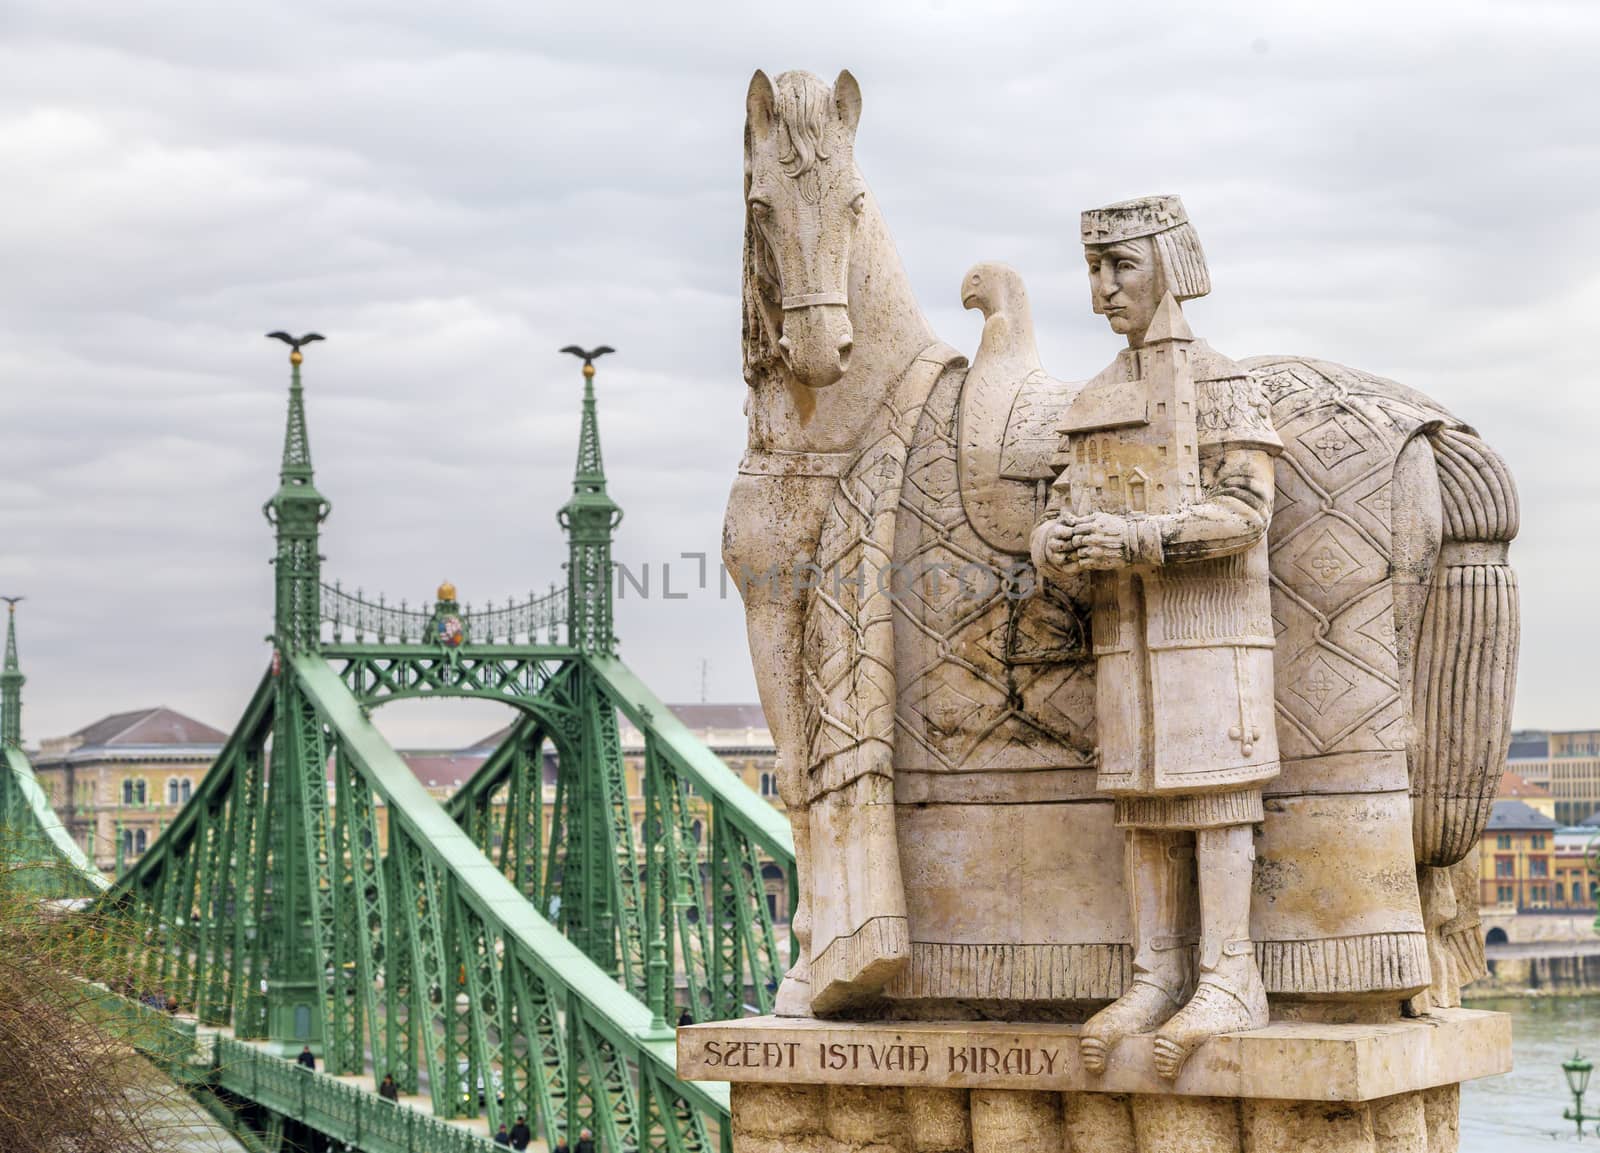 Budapest, HUNGARY - FEBRUARY 15, 2015 - Statue of Stephen I of Hungary on Gellert Hill by Goodday